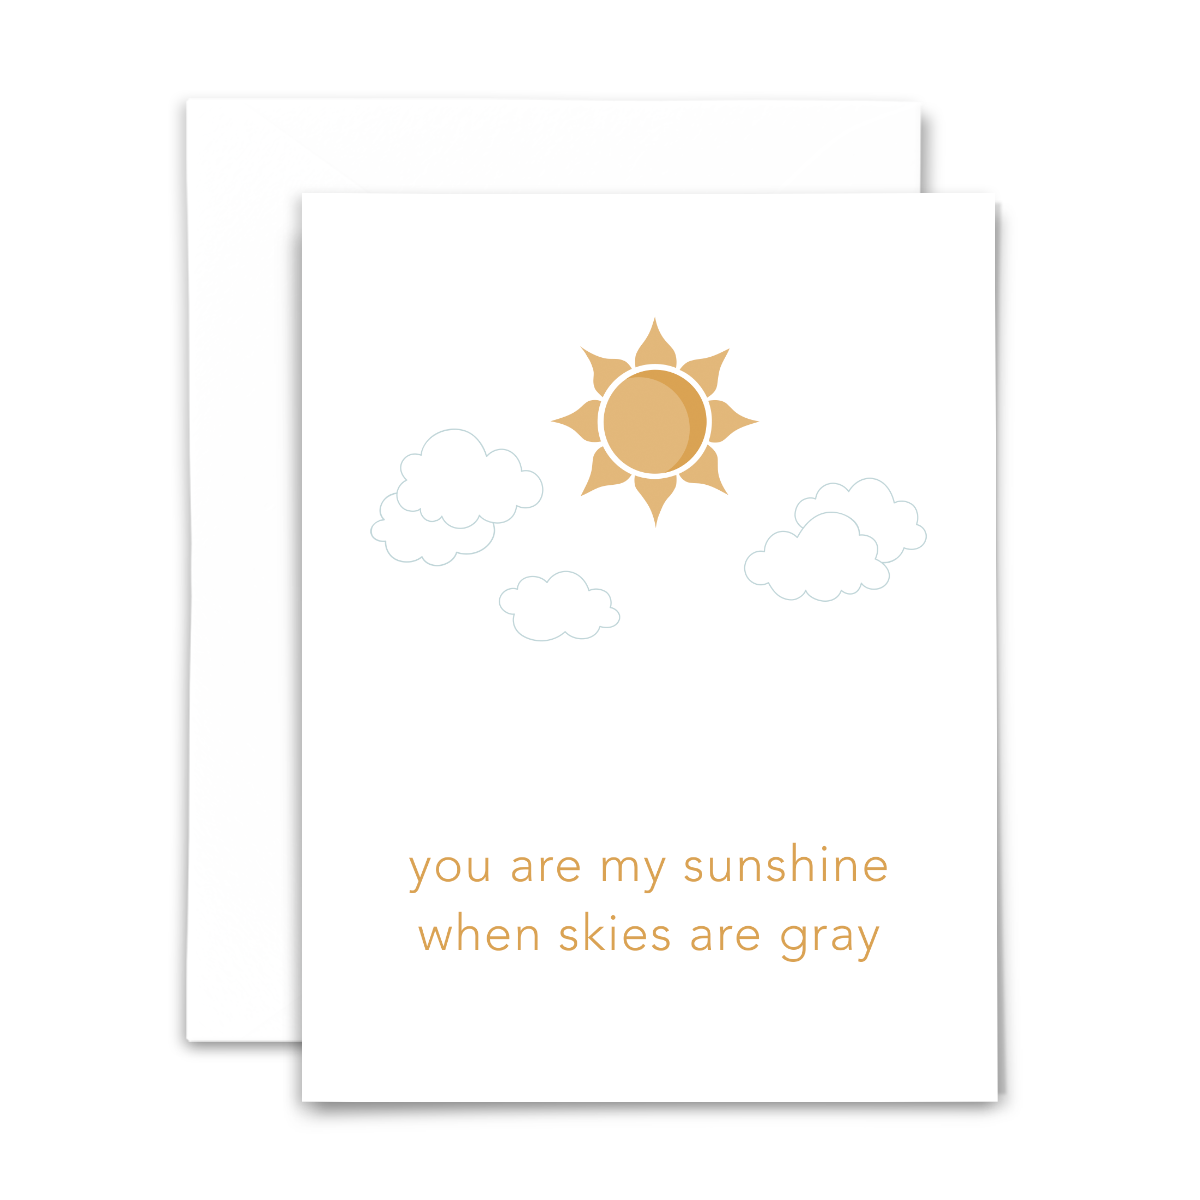 "You are my sunshine when skies are gray" blank greeting card. Golden-colored font and sun with light gray clouds on white background; with white envelope